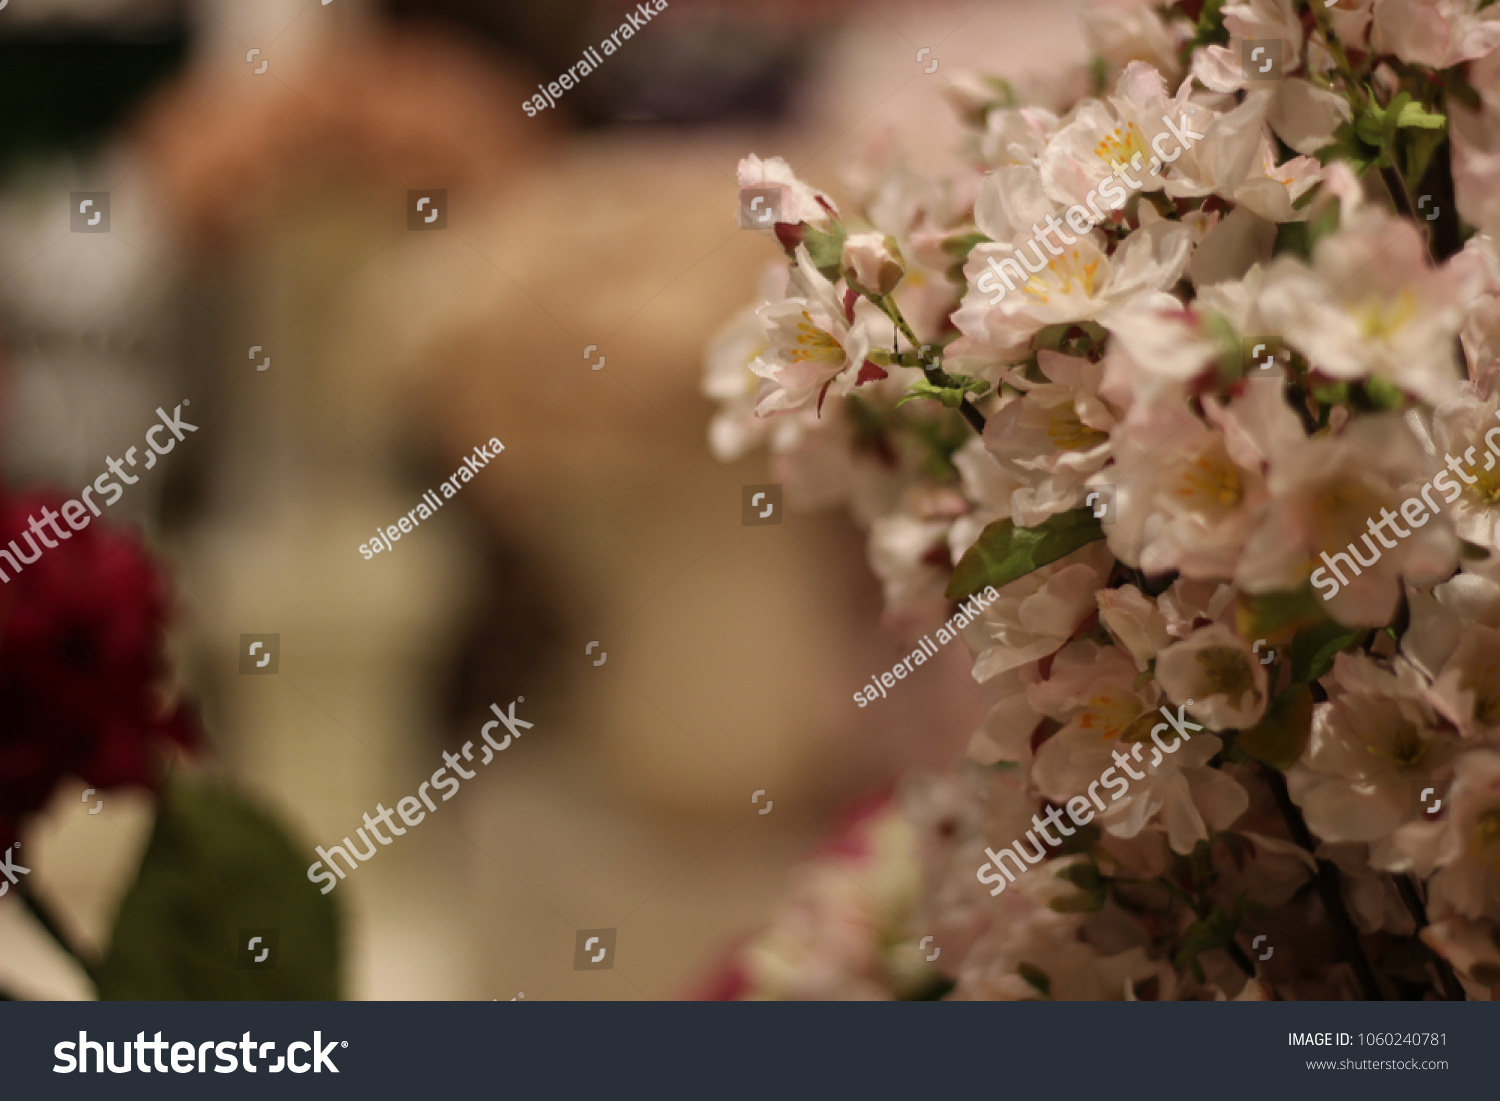 stock photo fresh flower in a function 1060240781